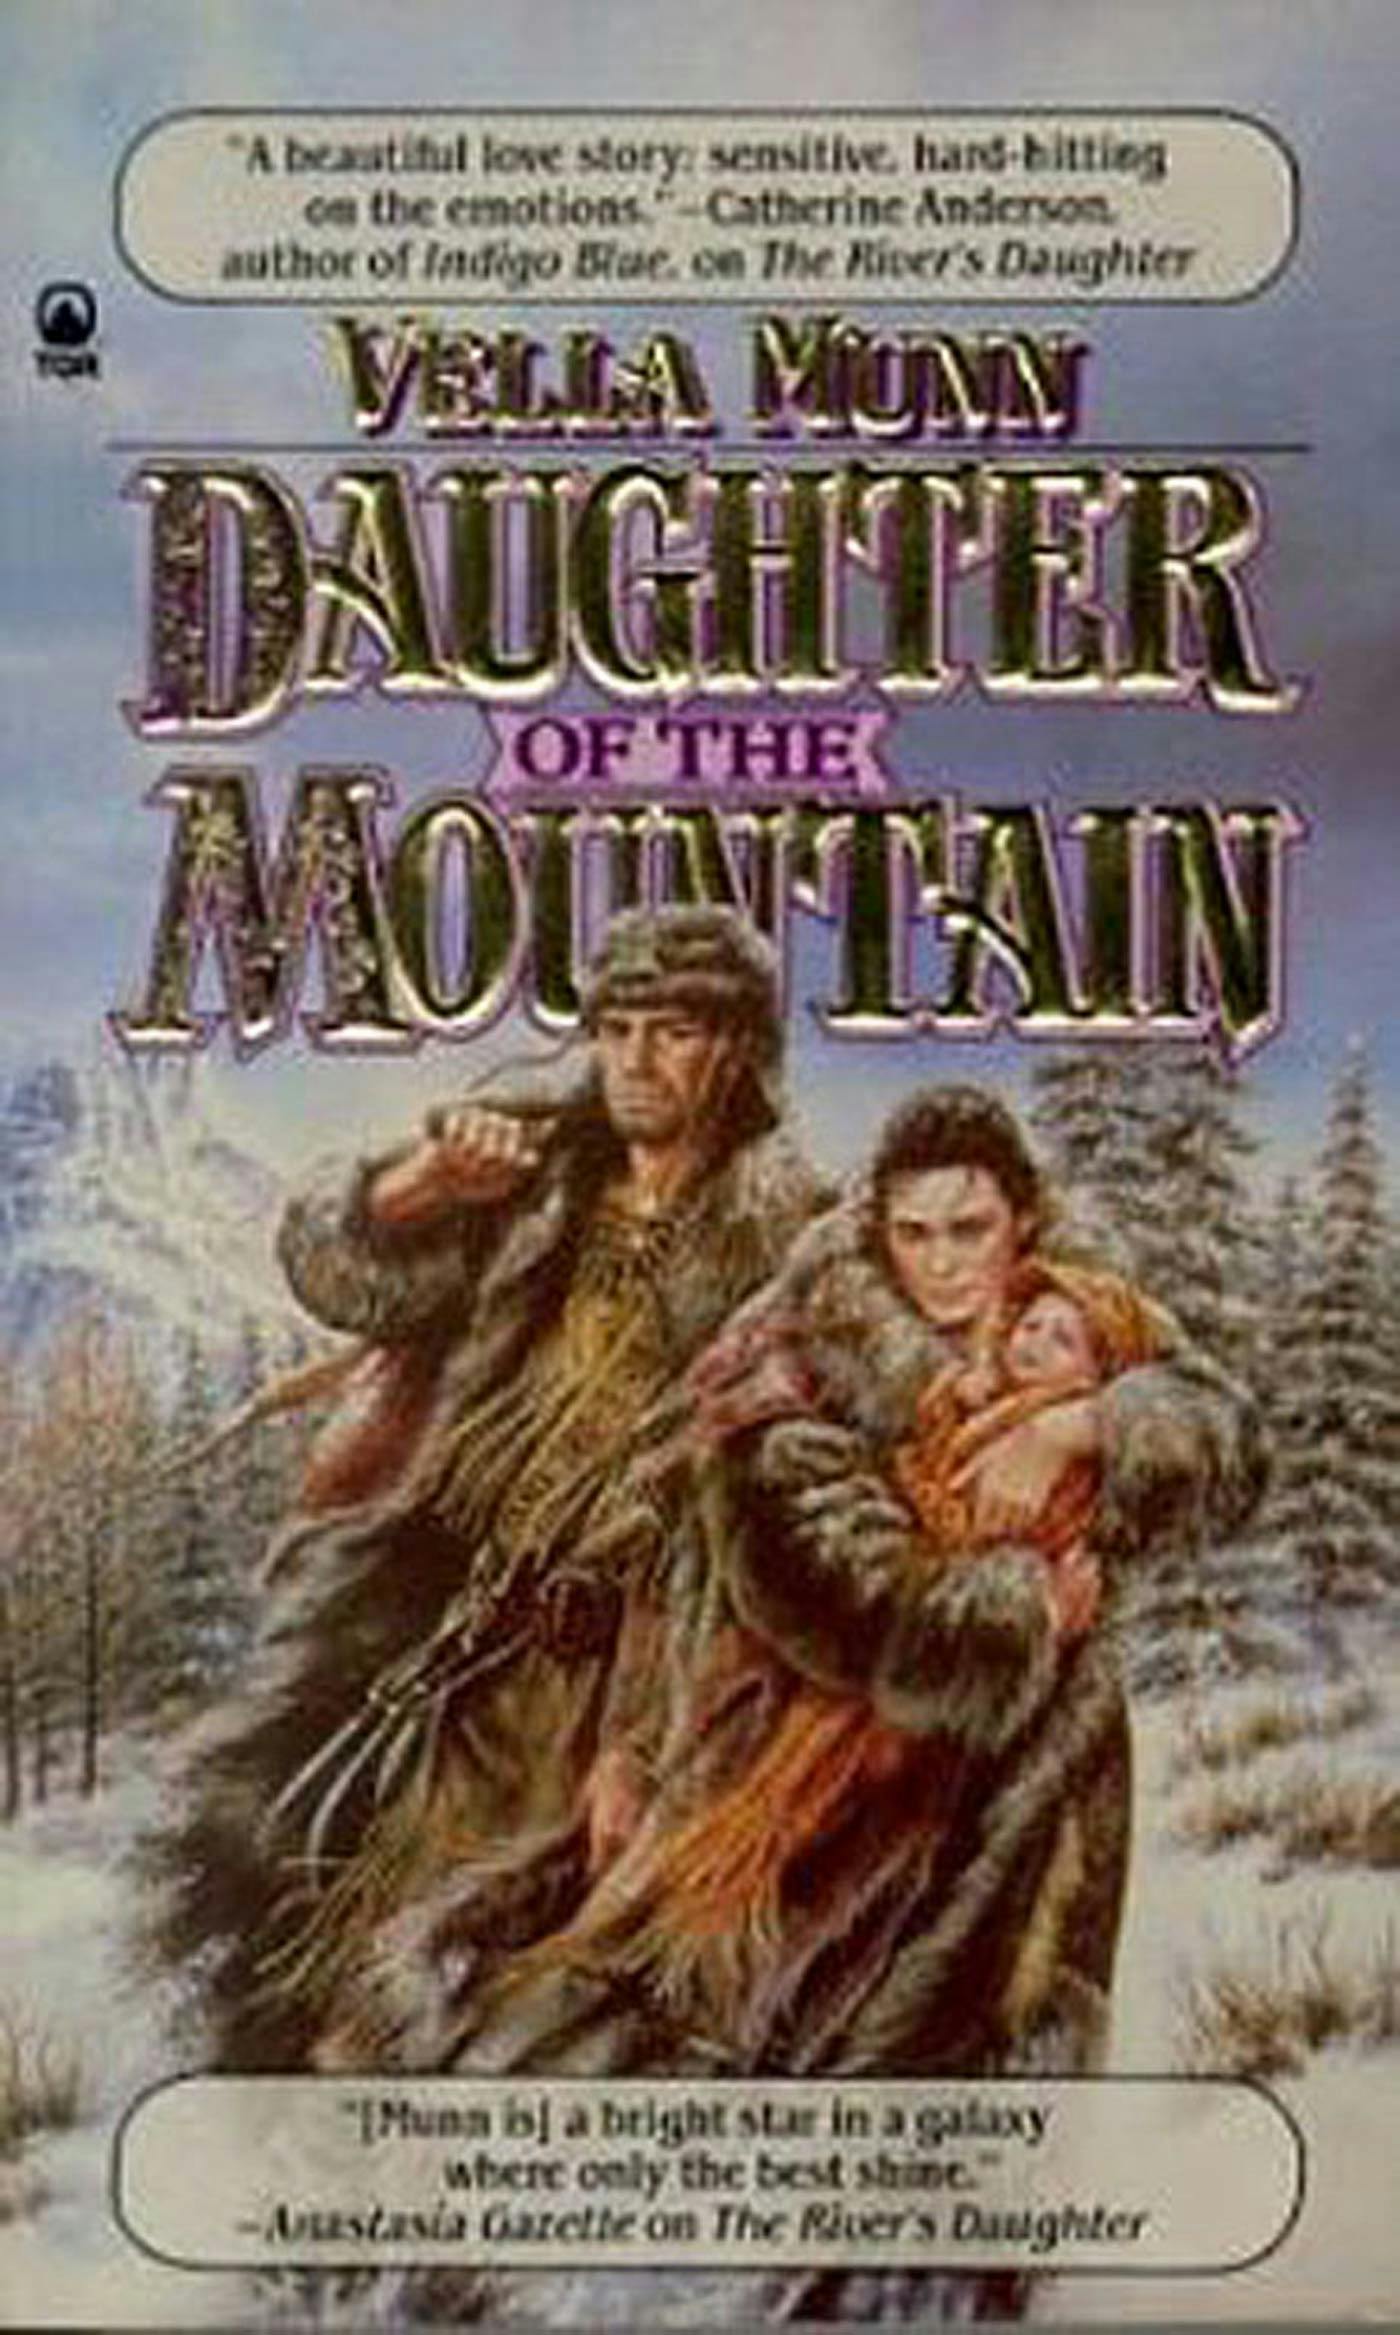 Cover for the book titled as: Daughter of the Mountain